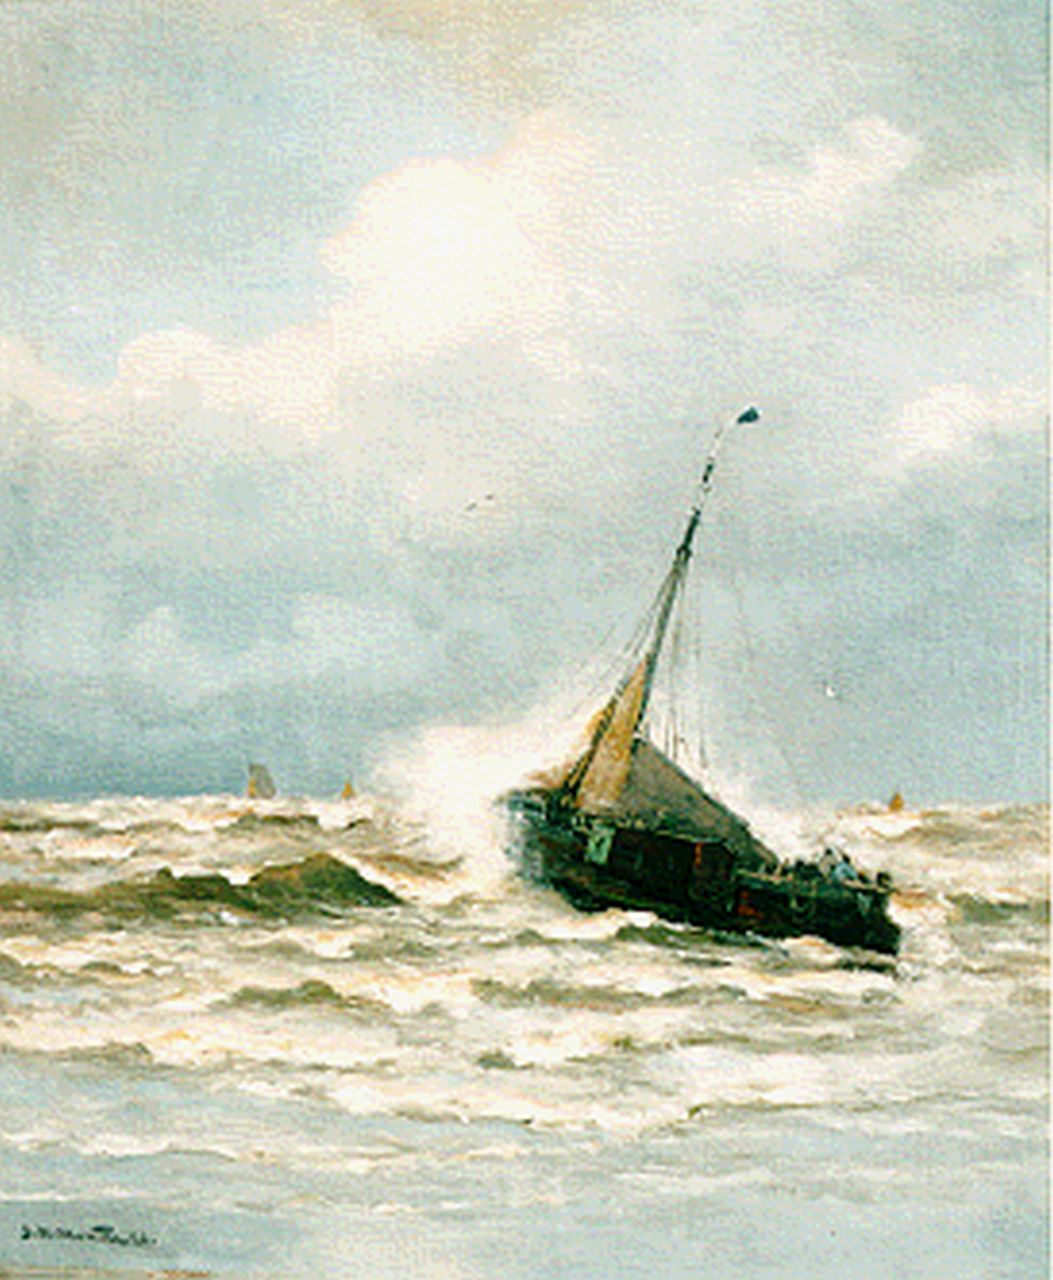 Munthe G.A.L.  | Gerhard Arij Ludwig 'Morgenstjerne' Munthe, A boat in the surf, oil on canvas 75.6 x 63.5 cm, signed l.l. and dated '26